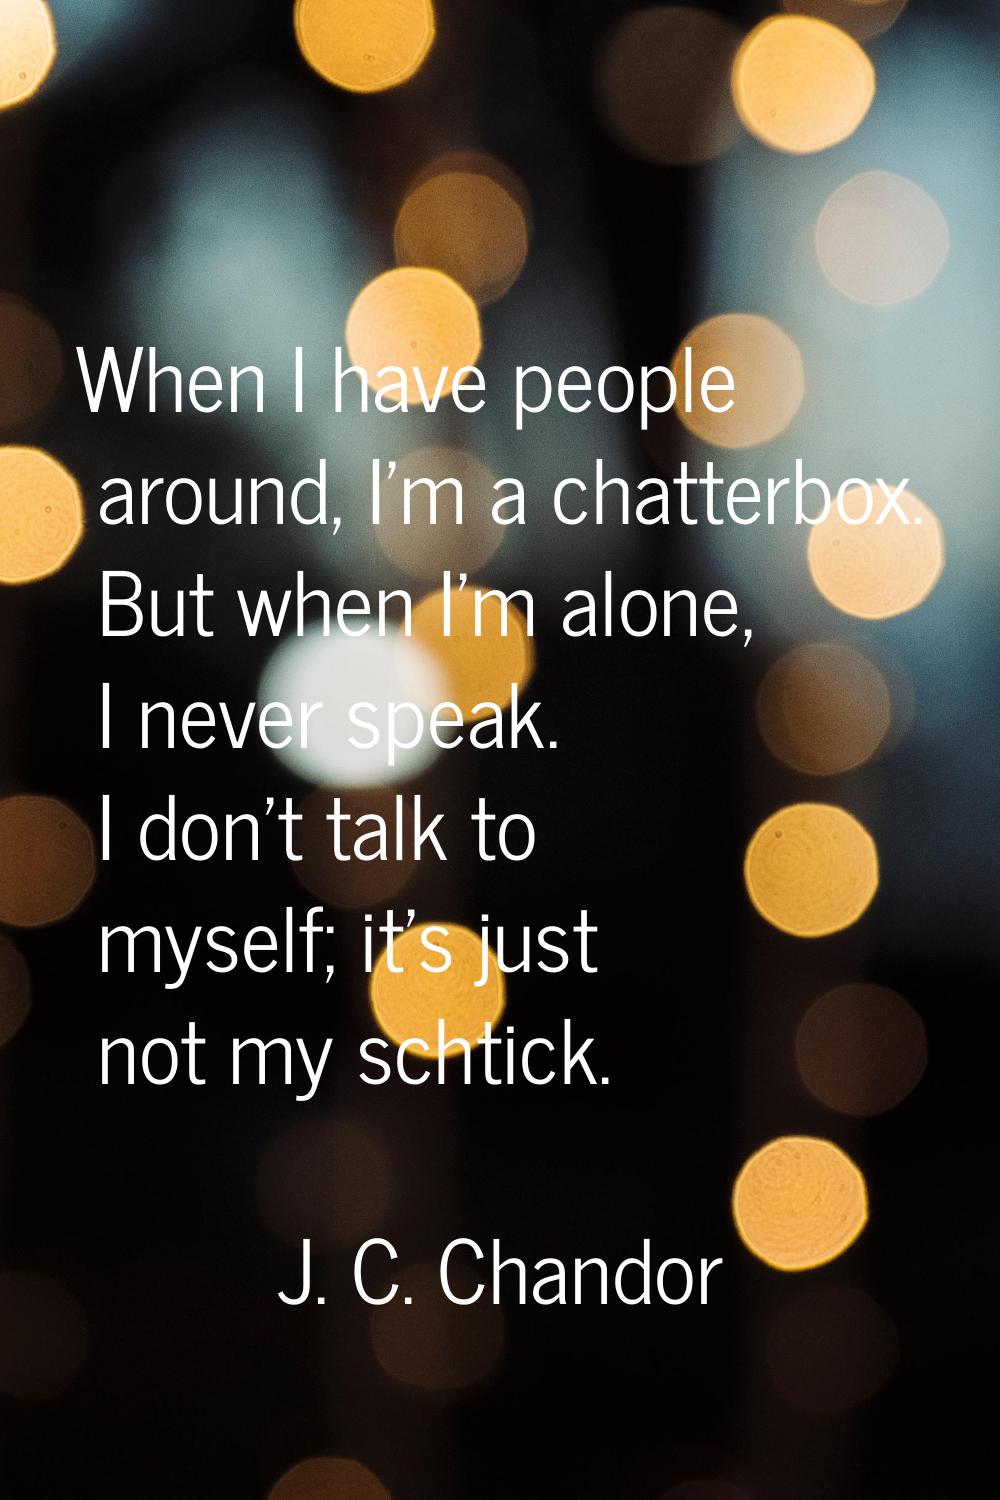 When I have people around, I'm a chatterbox. But when I'm alone, I never speak. I don't talk to mys